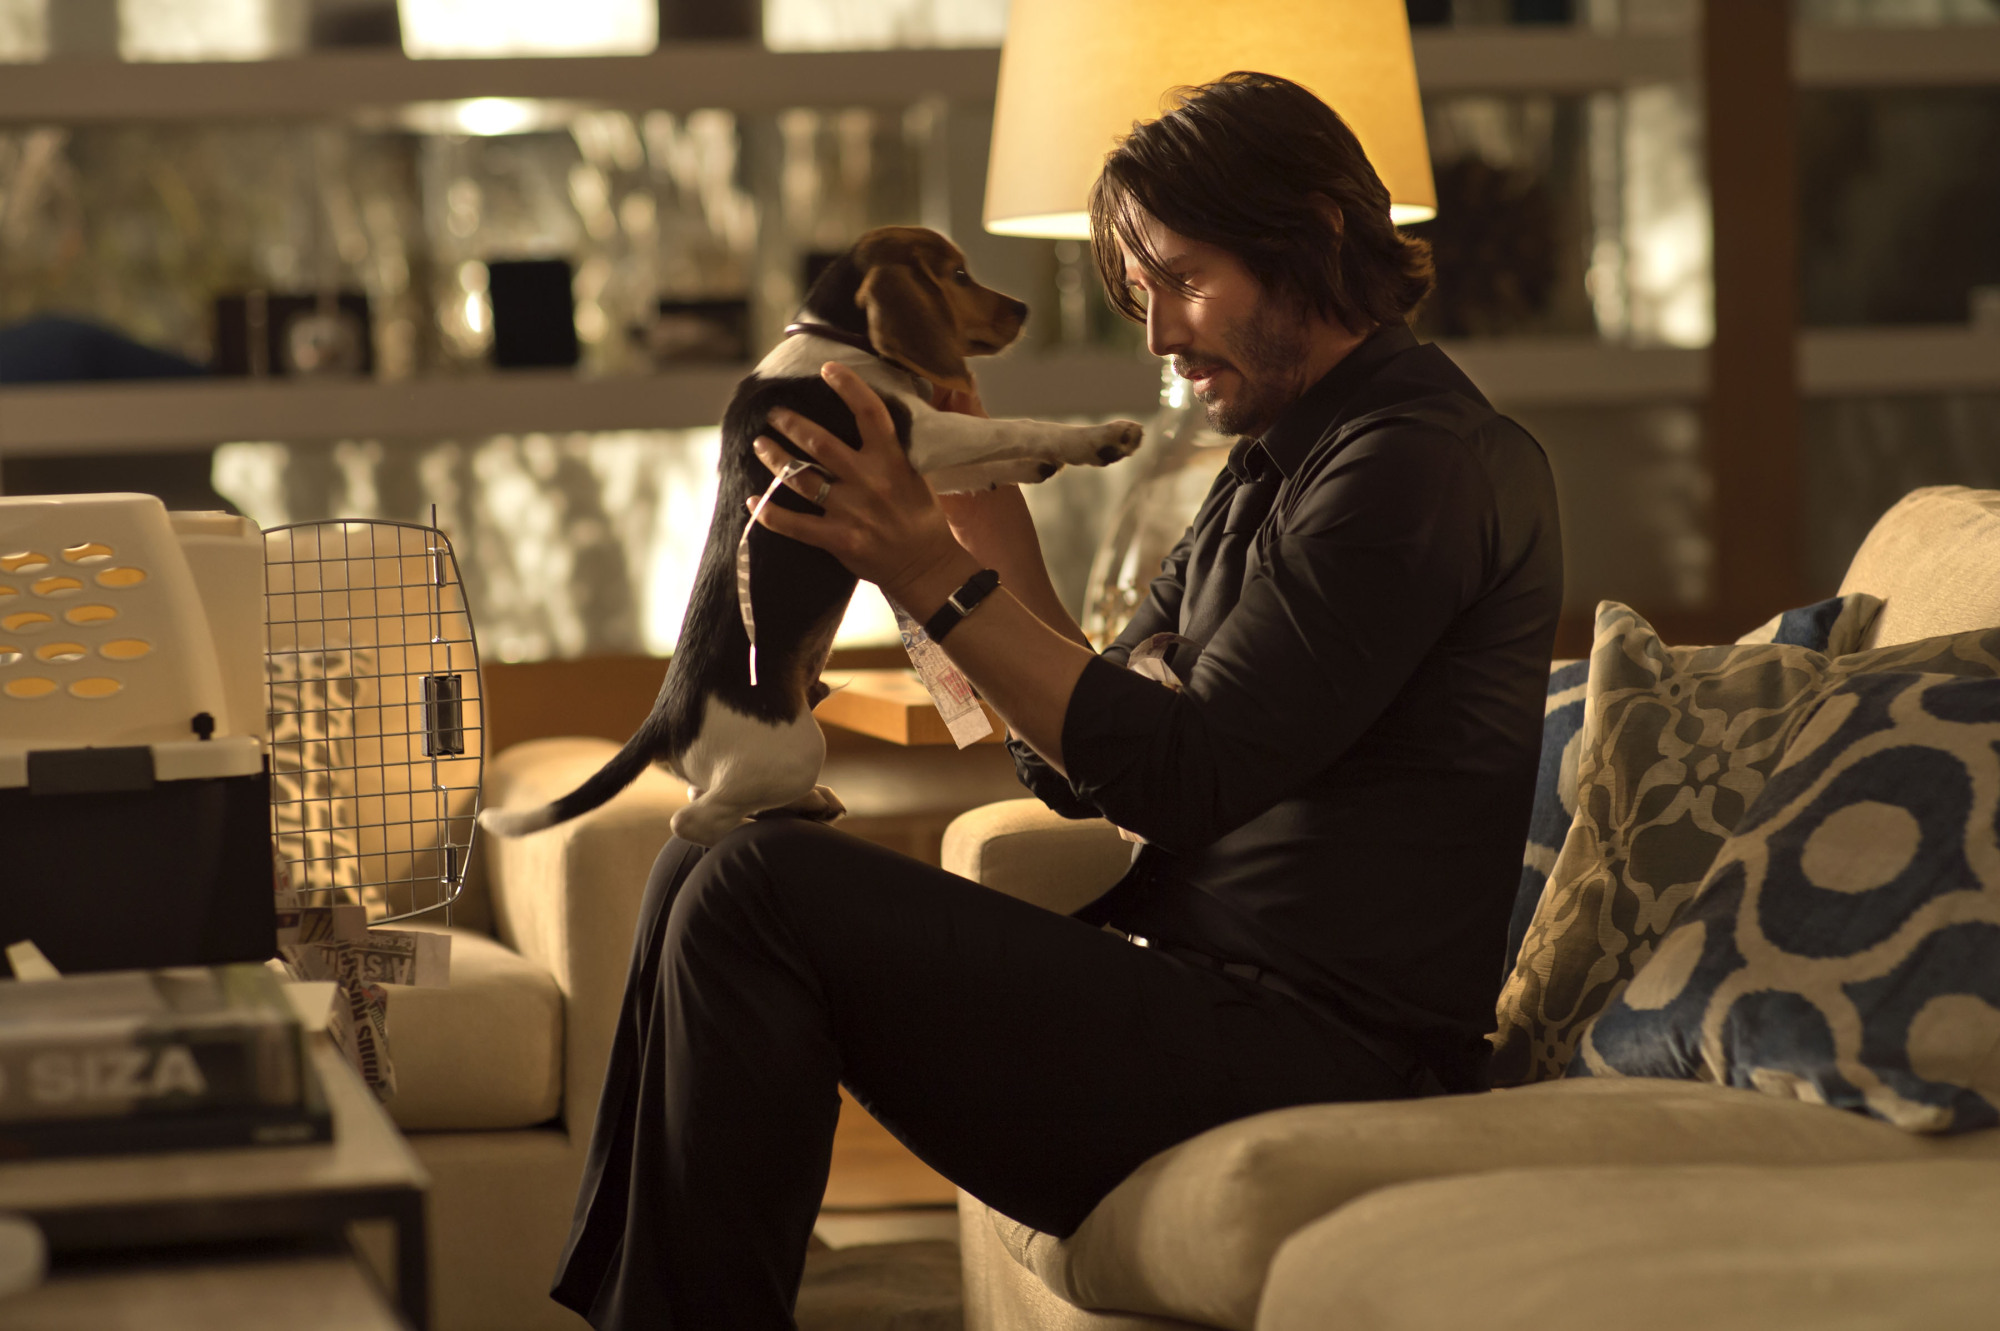 A man holds up a puppy lovingly while sitting on a couch.